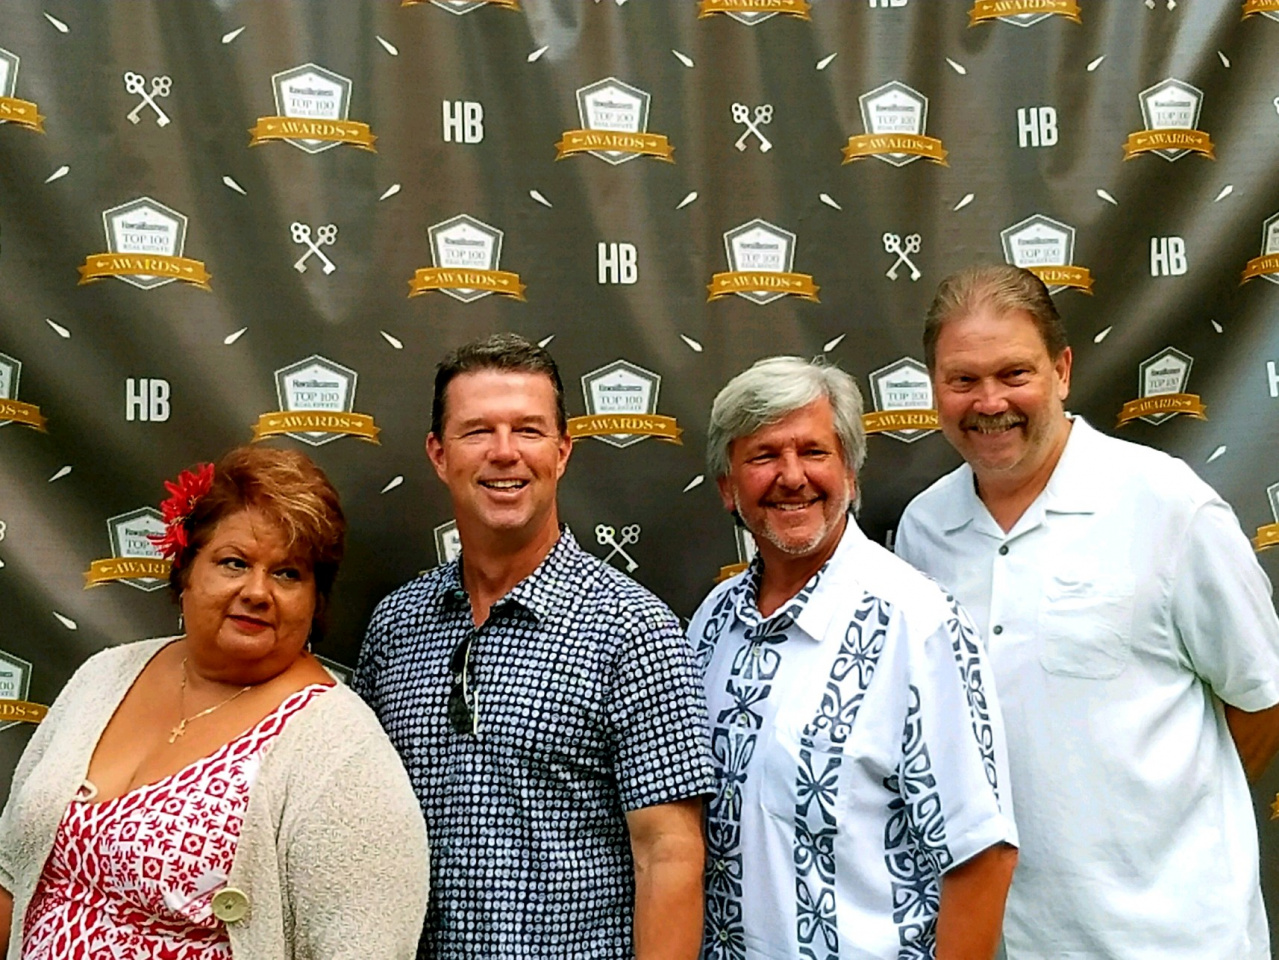 Pictured left to right: Lydia Pedro R(B), Brad MacArthur R(B), Tom Tezak R(B) and Roger Pleski R(S) were honored during Hawaii Business Magazine’s 12th Annual Top 100 Realtors Awards gala at the Royal Hawaiian Resort on Friday, June 1
Photo credit: Lisa Pleski